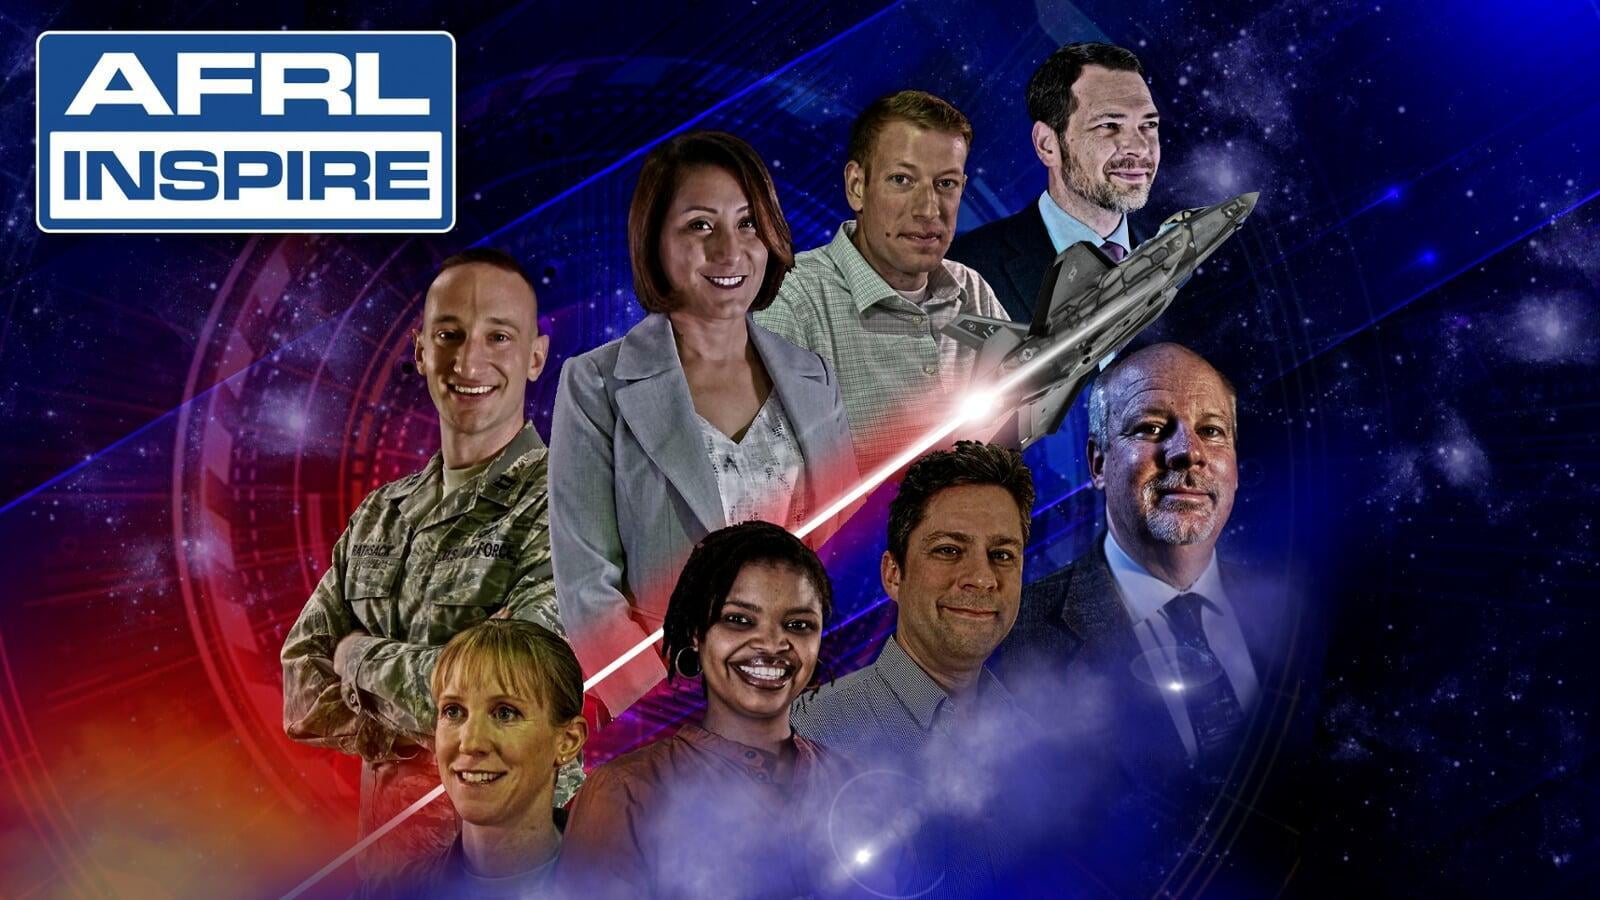 AFRL Inspire Lives Up to its Name with Impressive Lineup, Entertaining Topics 